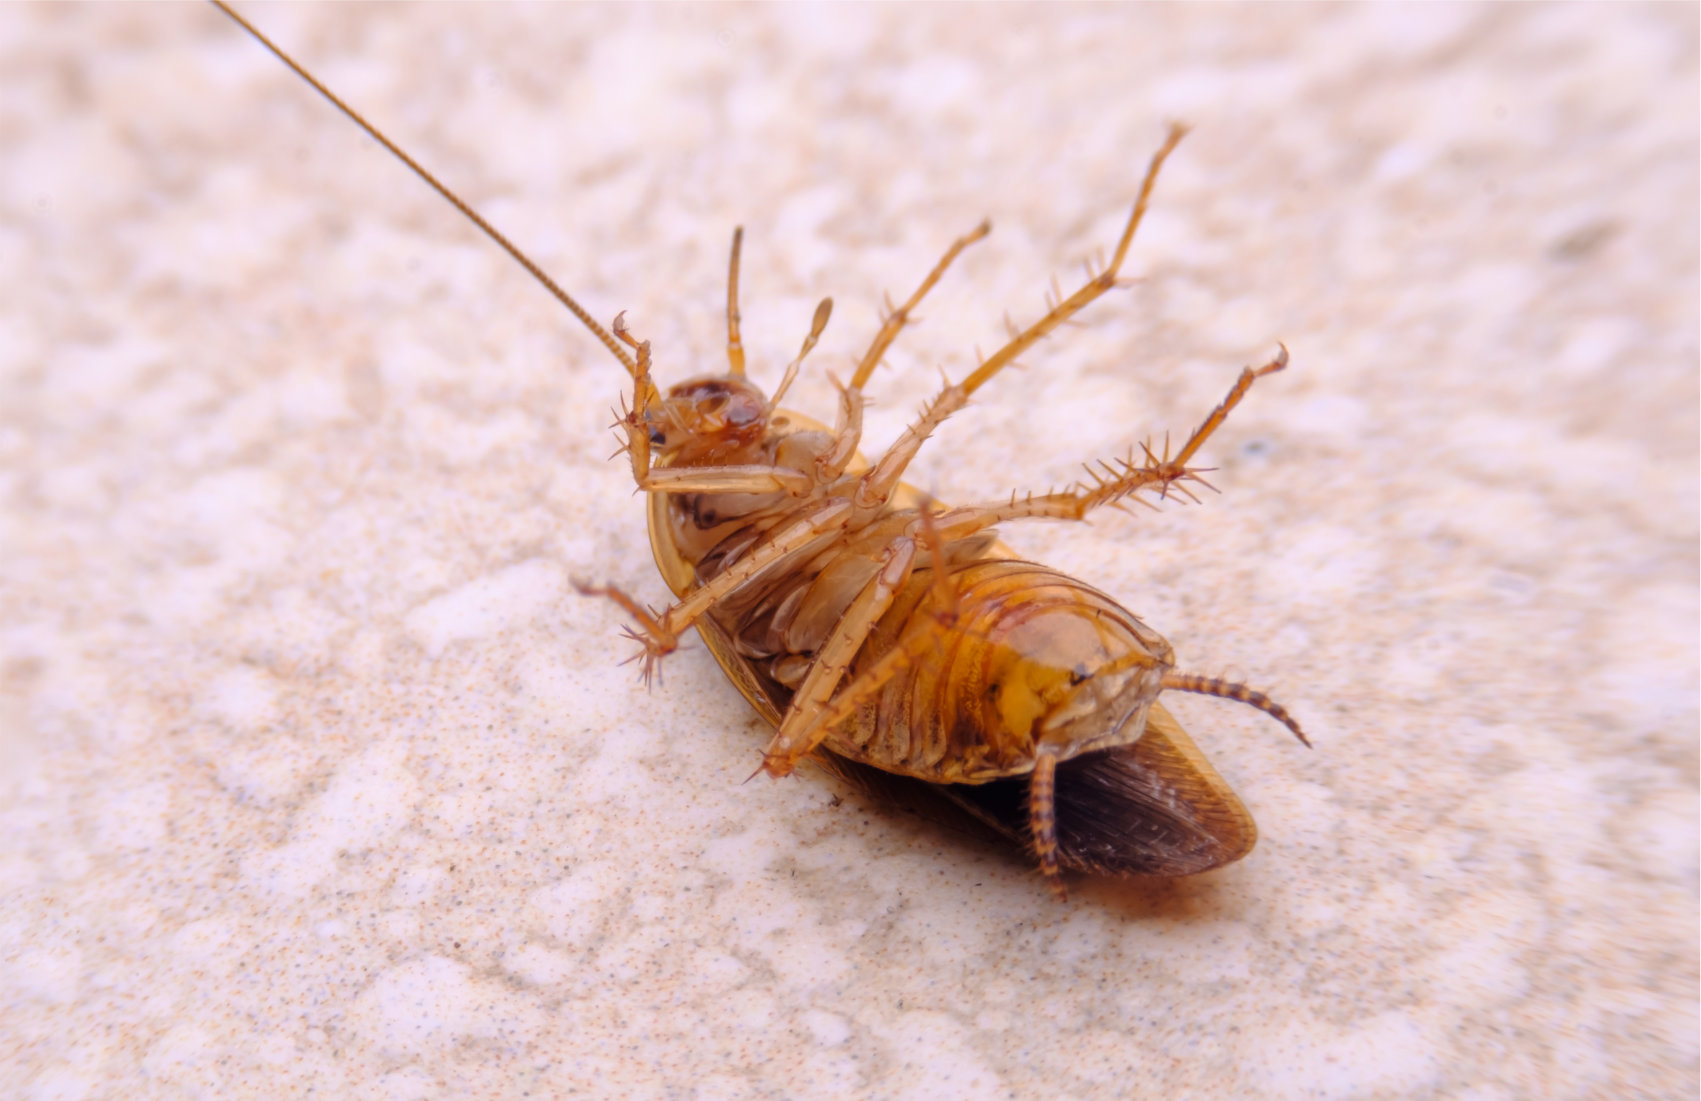 An image of roach laying upside down